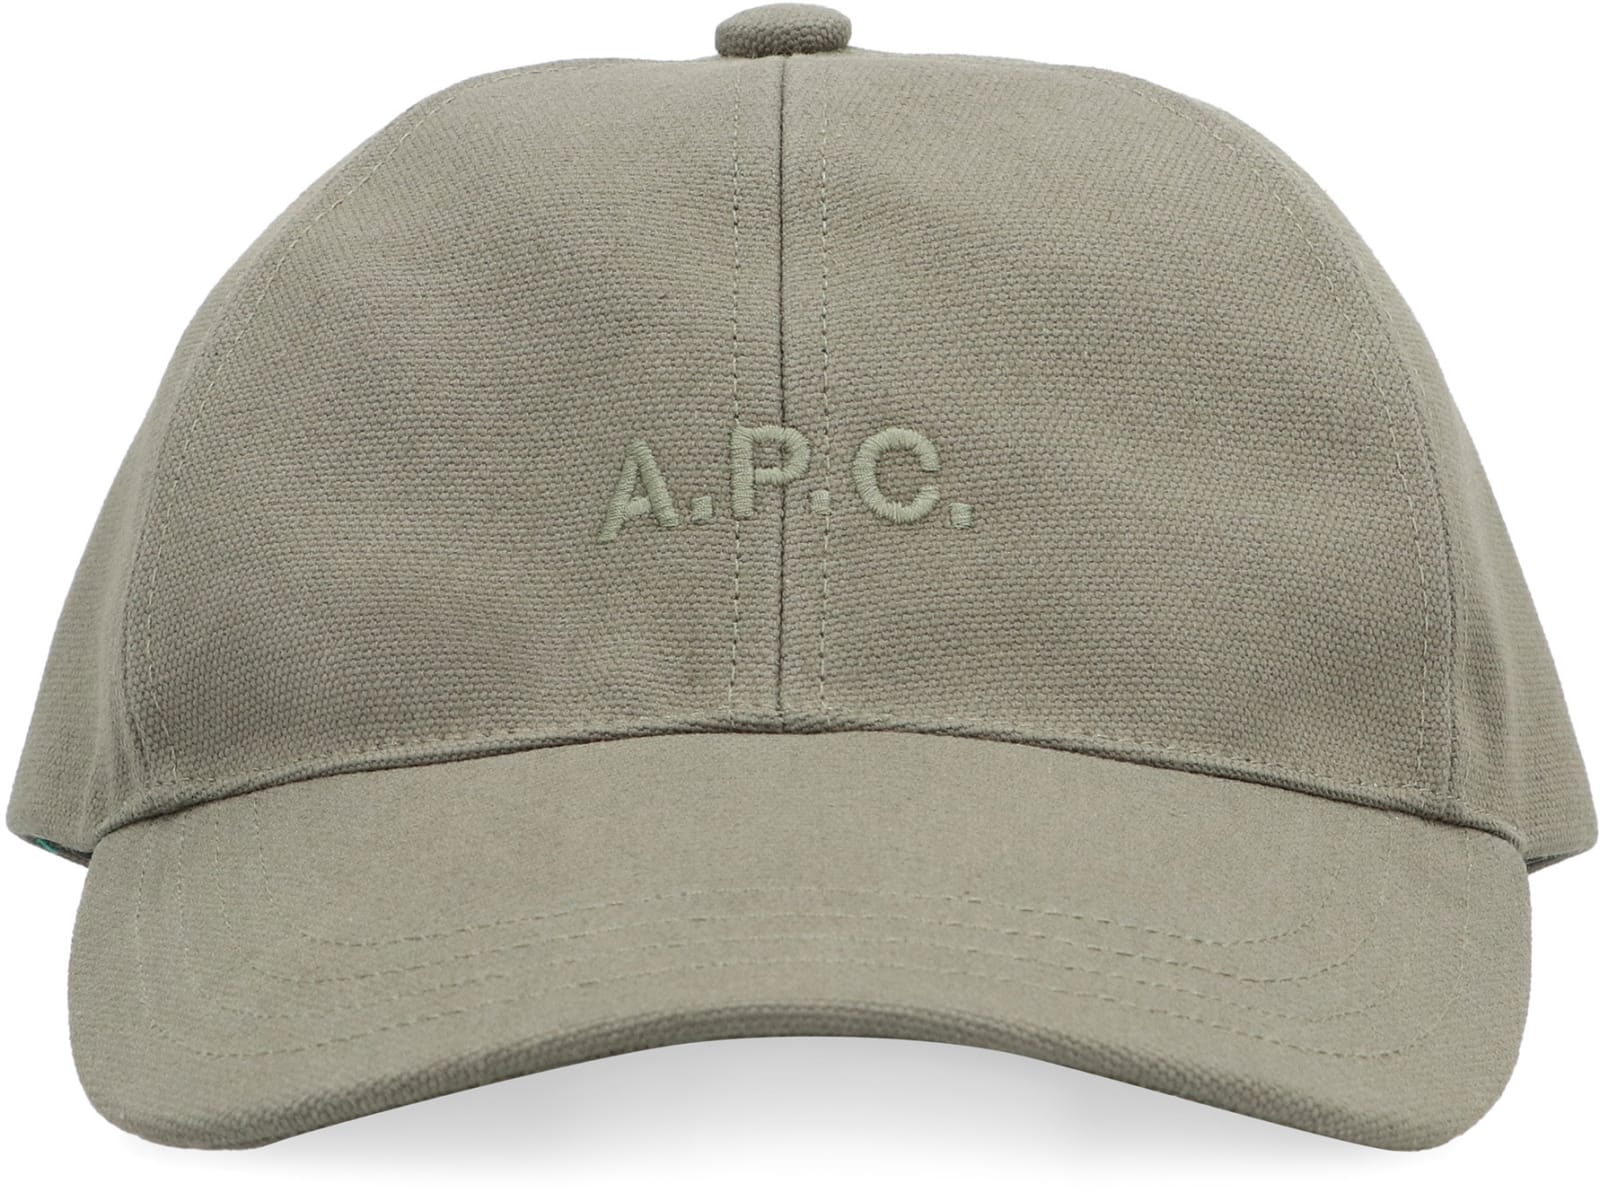 Shop Apc Charlie Embroidered Baseball Cap In Green